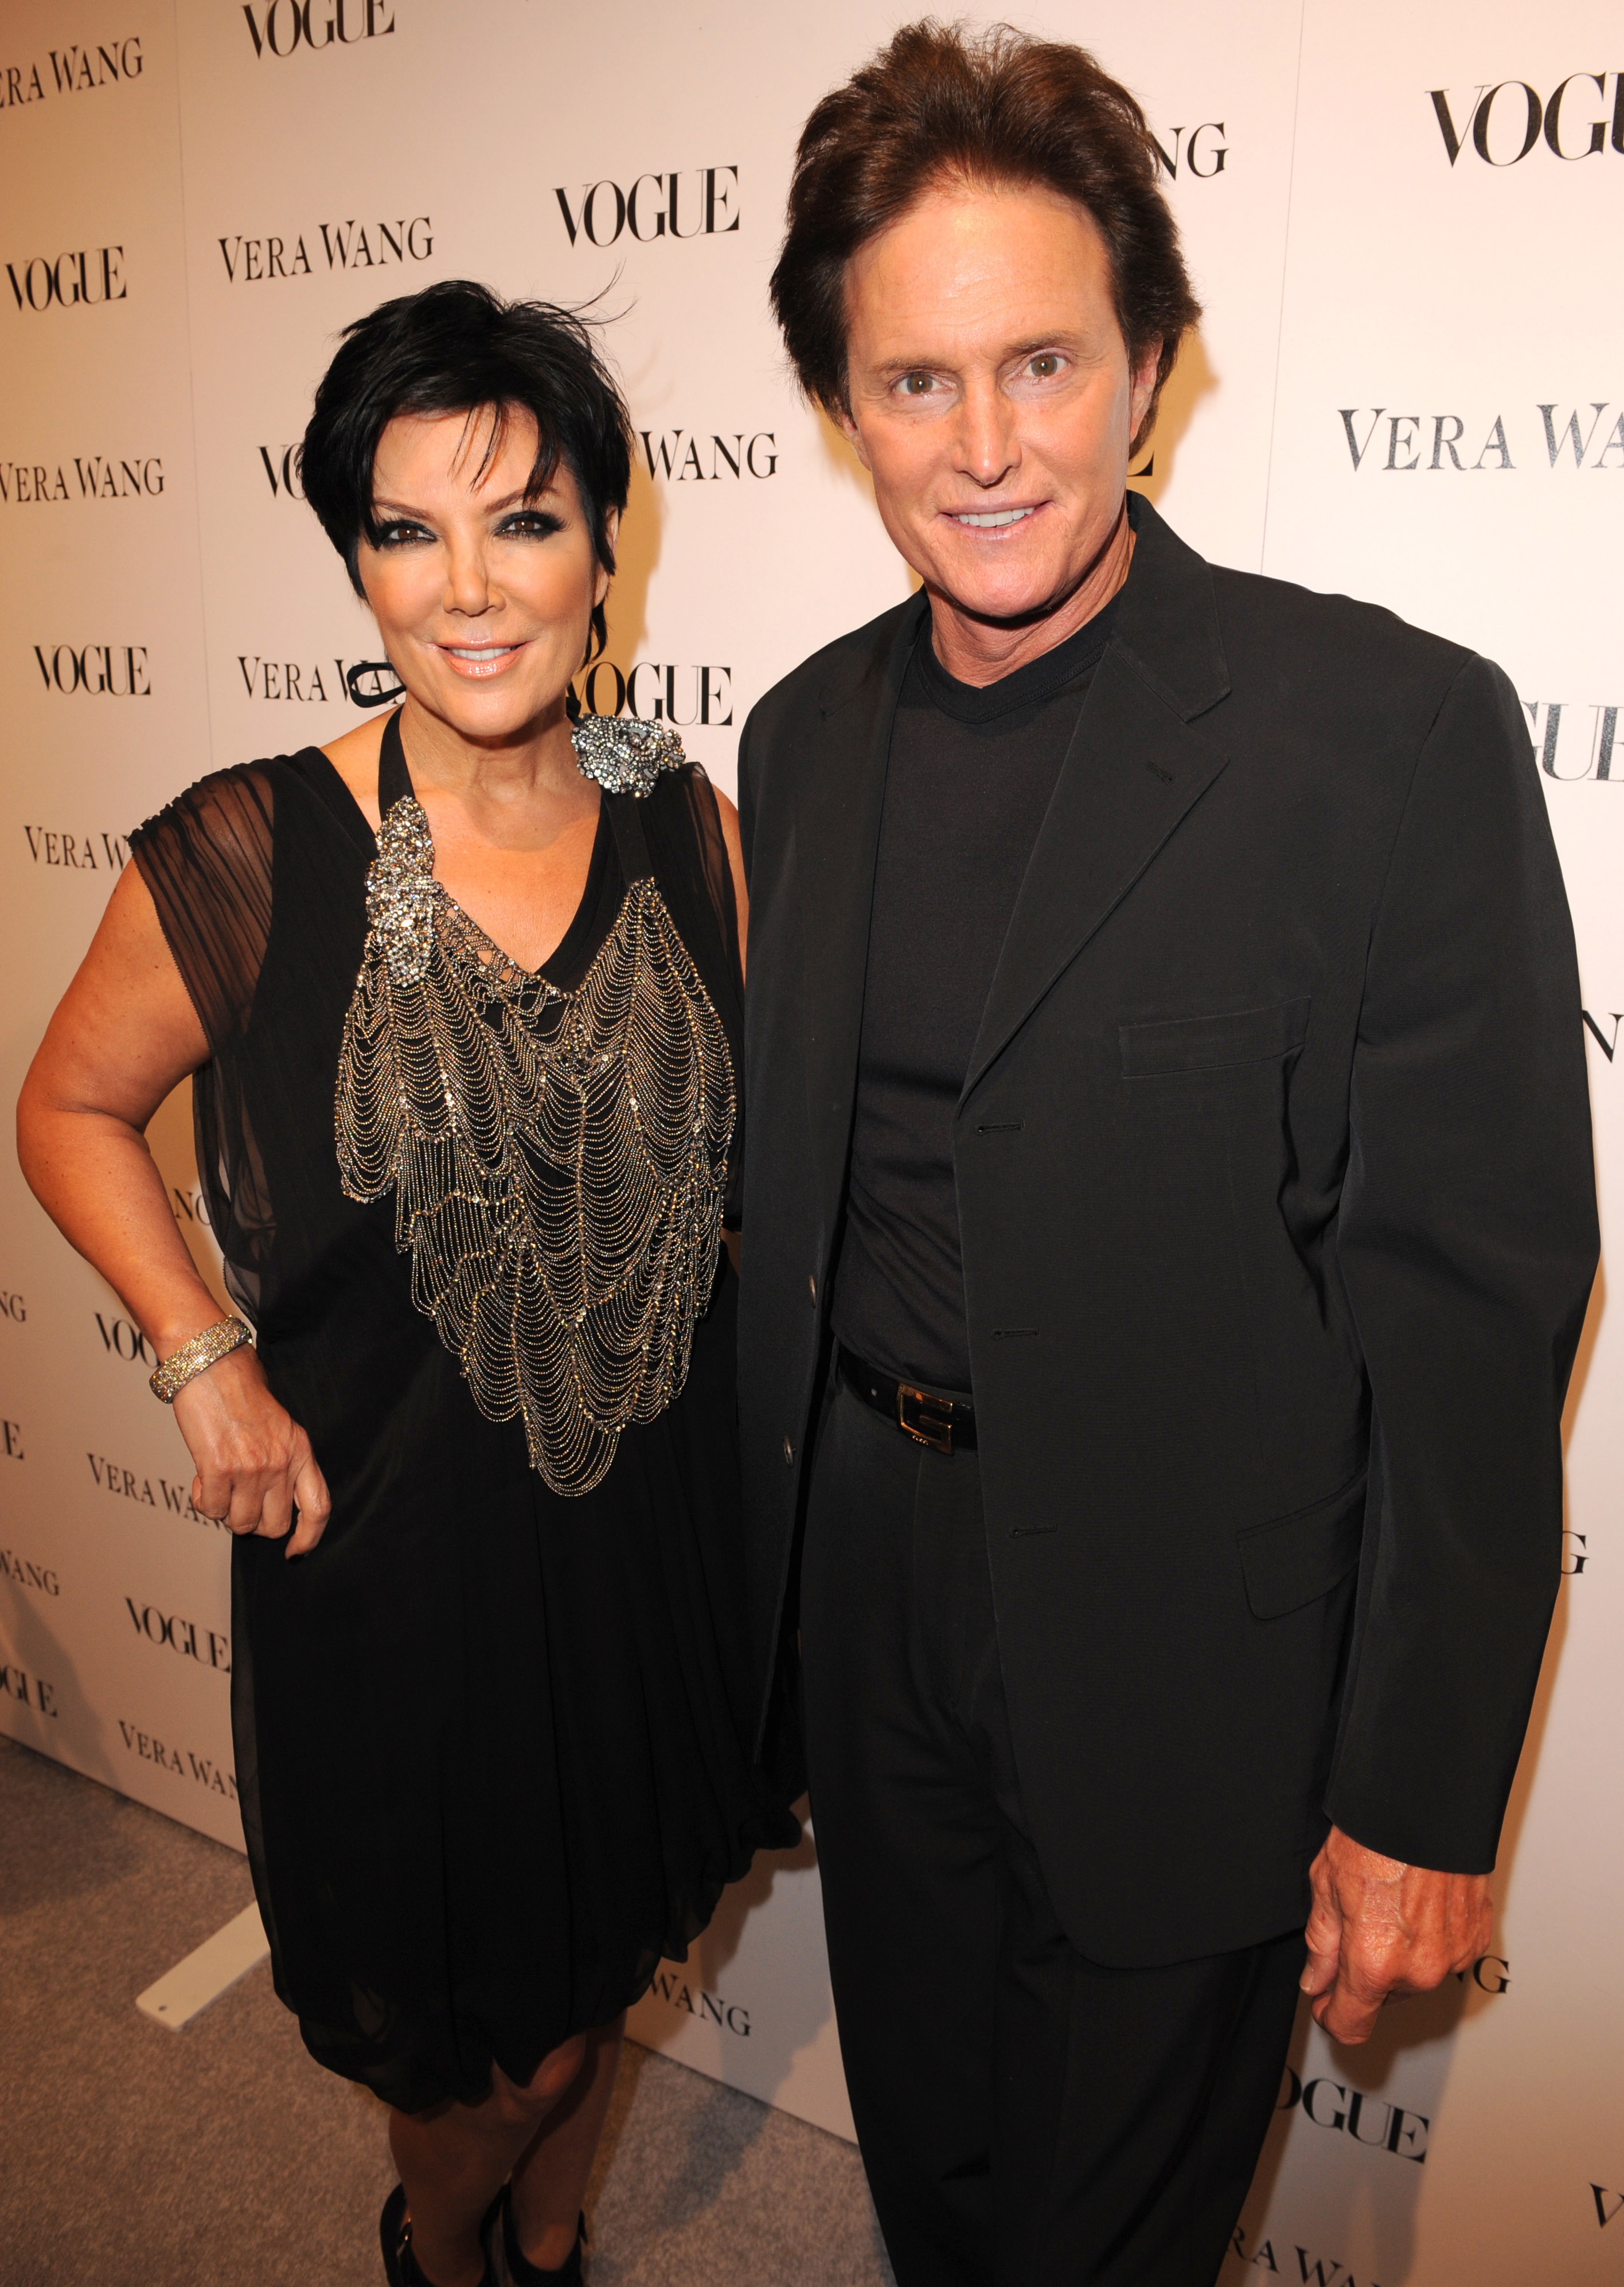 Kris Jenner and Bruce Jenner attend the Vera Wang Store Launch in Los Angeles, California on March 2, 2010 | Source: Getty Images